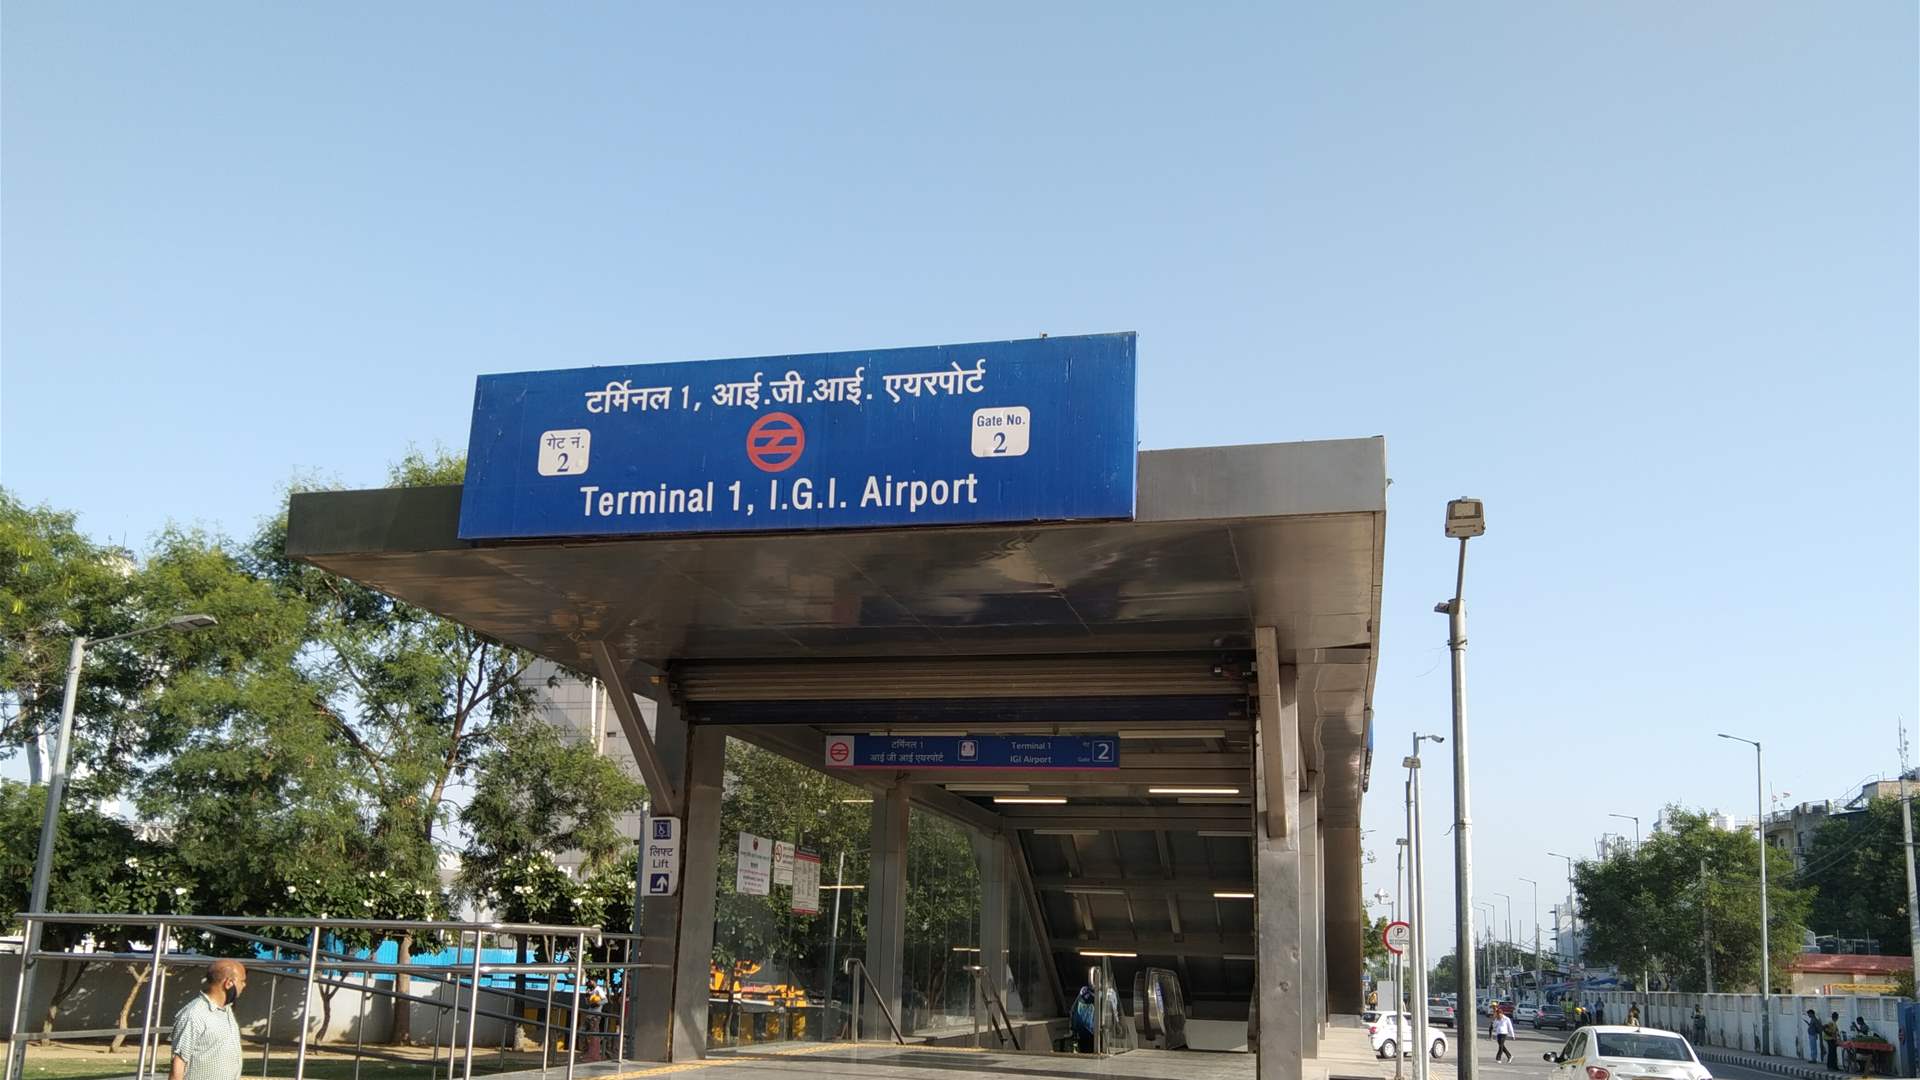 Roof collapses at Delhi airport, one dead